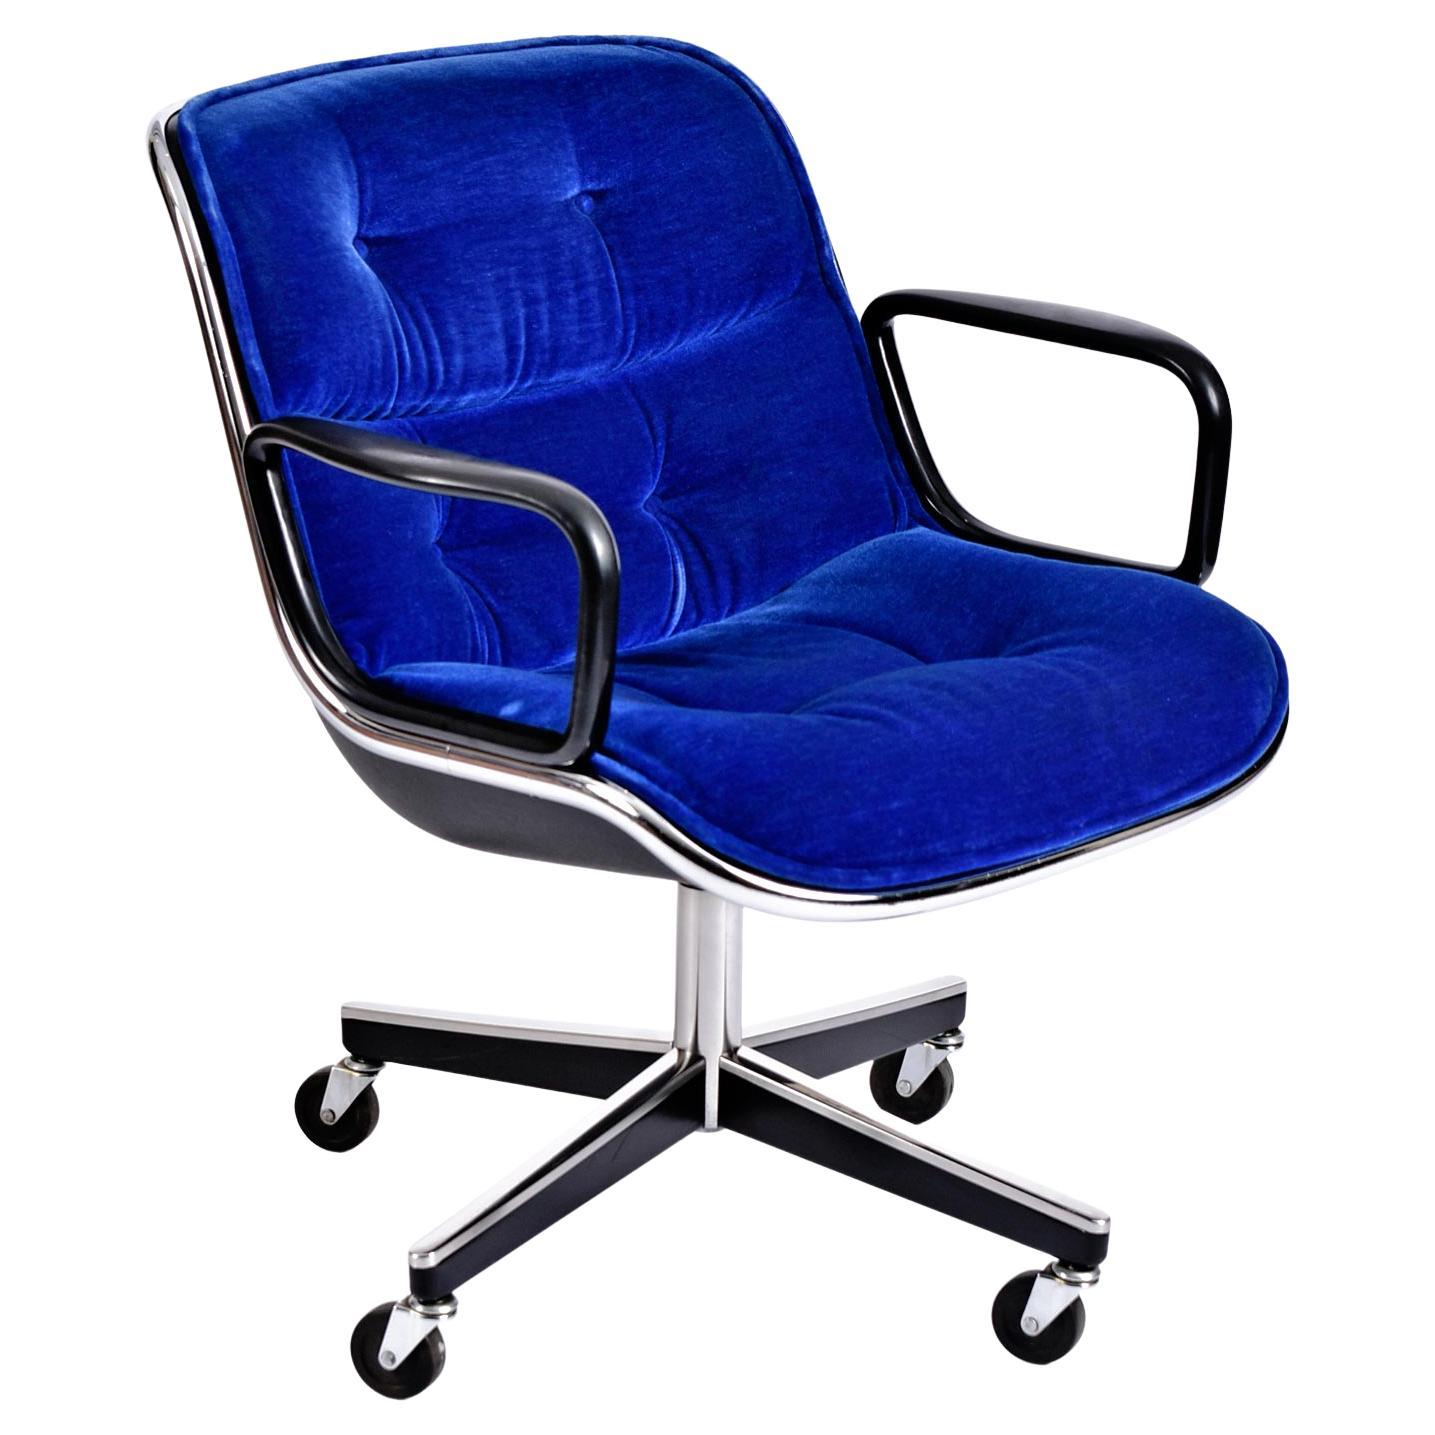 Blue Velvet Executive Chair Charles Pollock for Knoll with Height Tension Knob For Sale